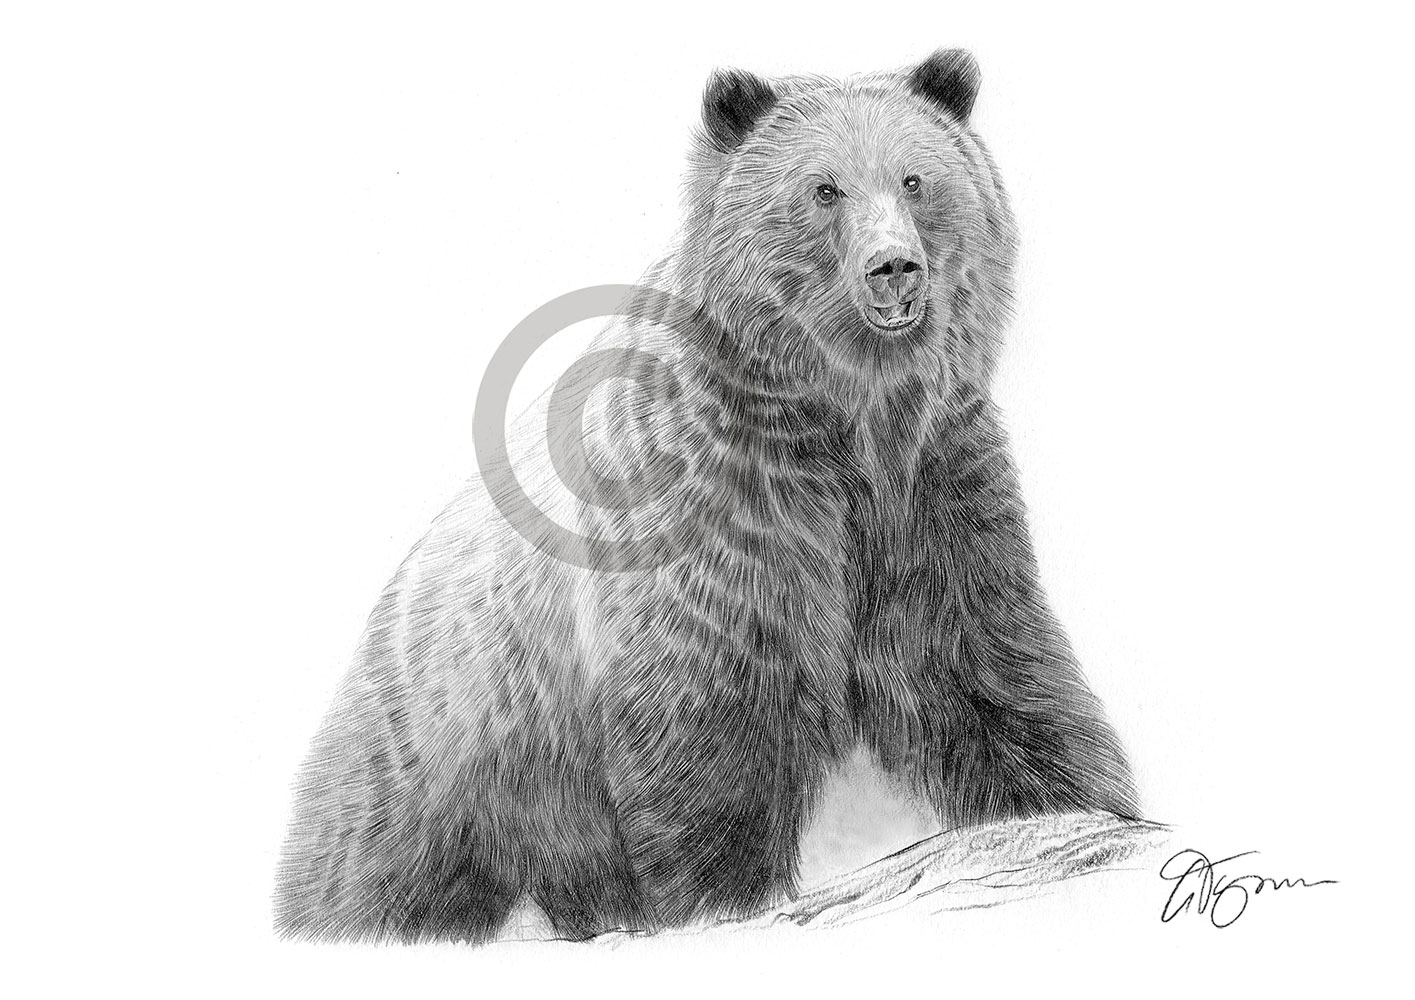 Pencil drawing of a brown bear by artist Gary Tymon